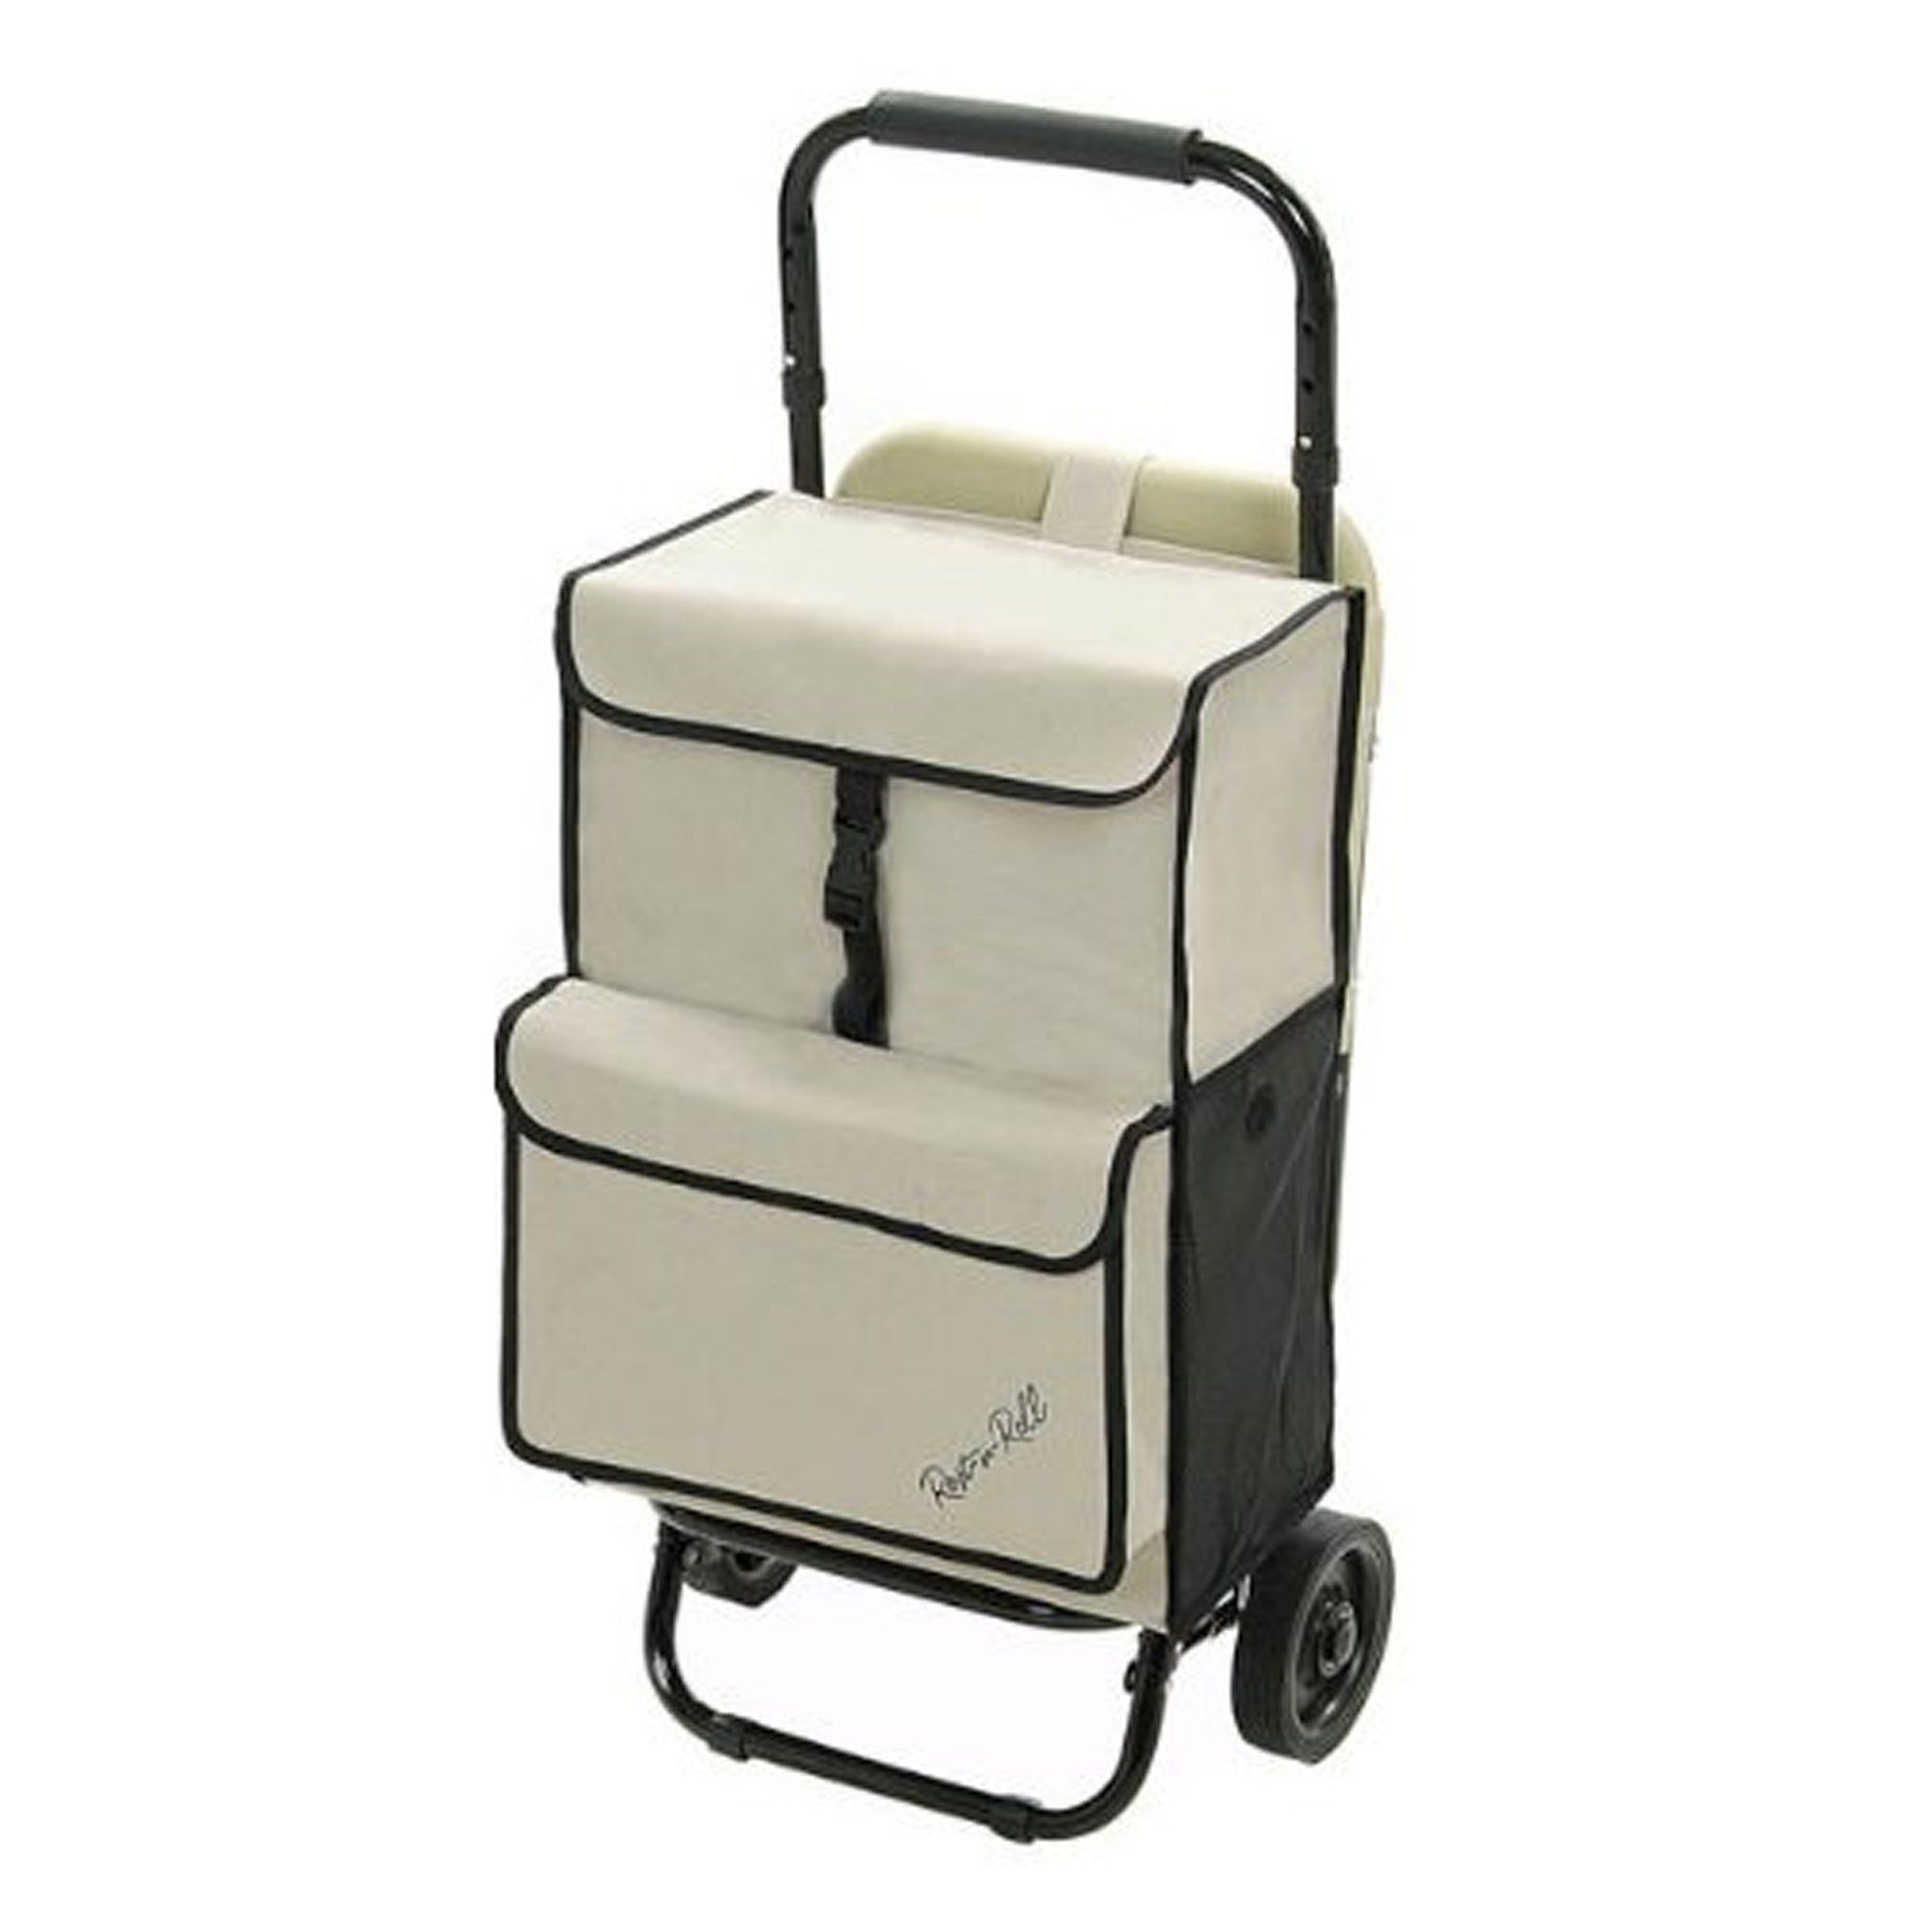 Rest-n-Roll STND-1 Deluxe Multipurpose Carrying Cart With Built-in Seat